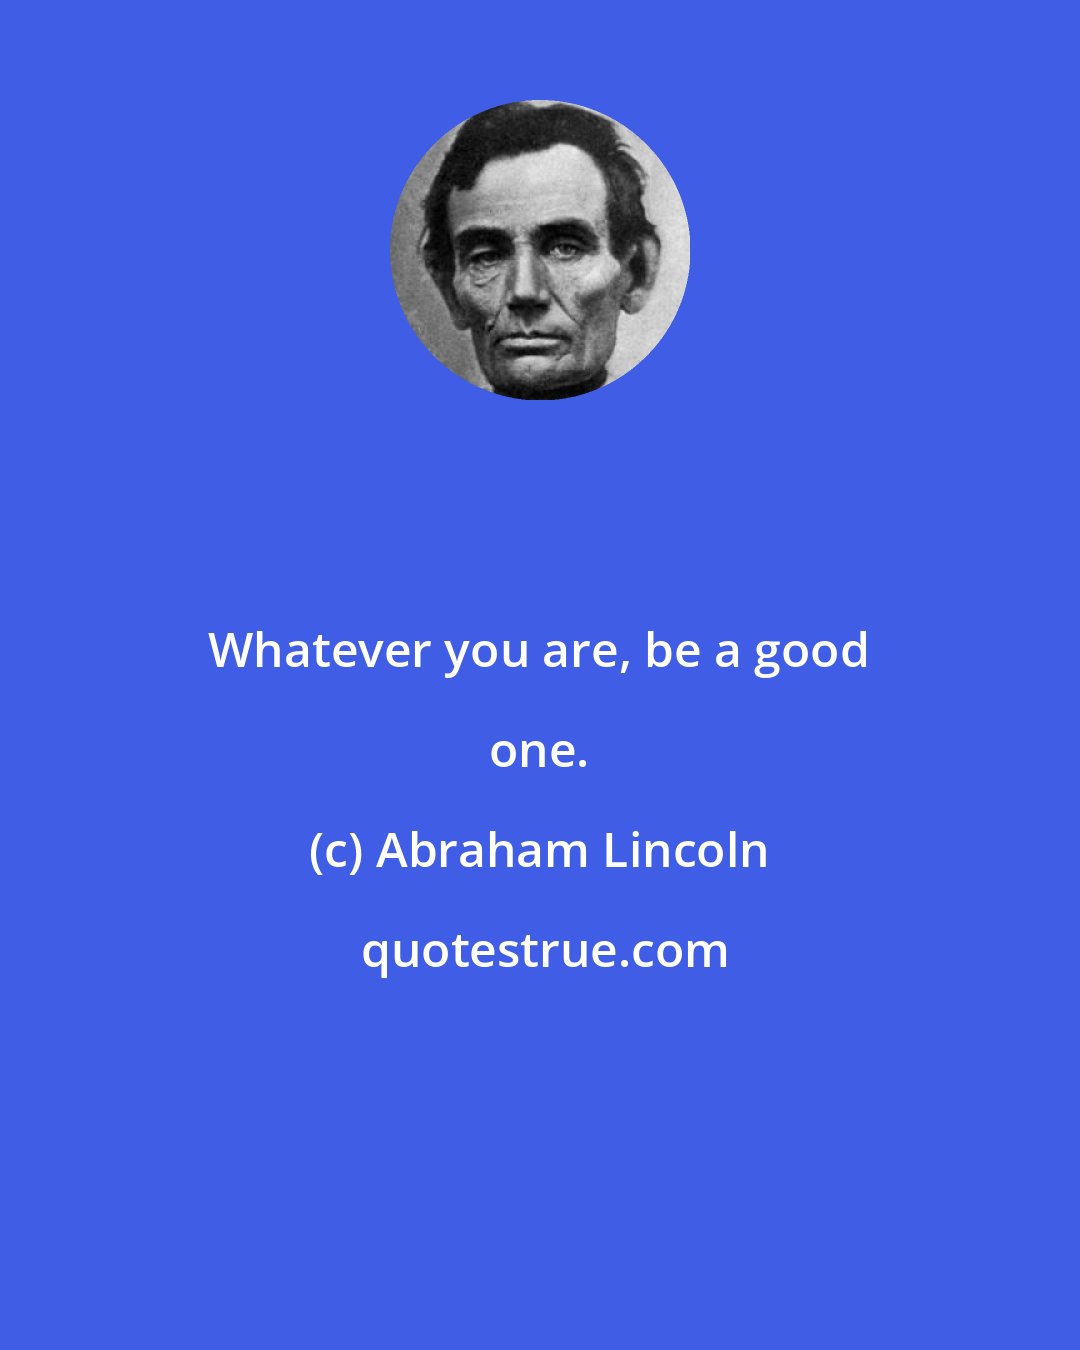 Abraham Lincoln: Whatever уоu are, bе а good one.